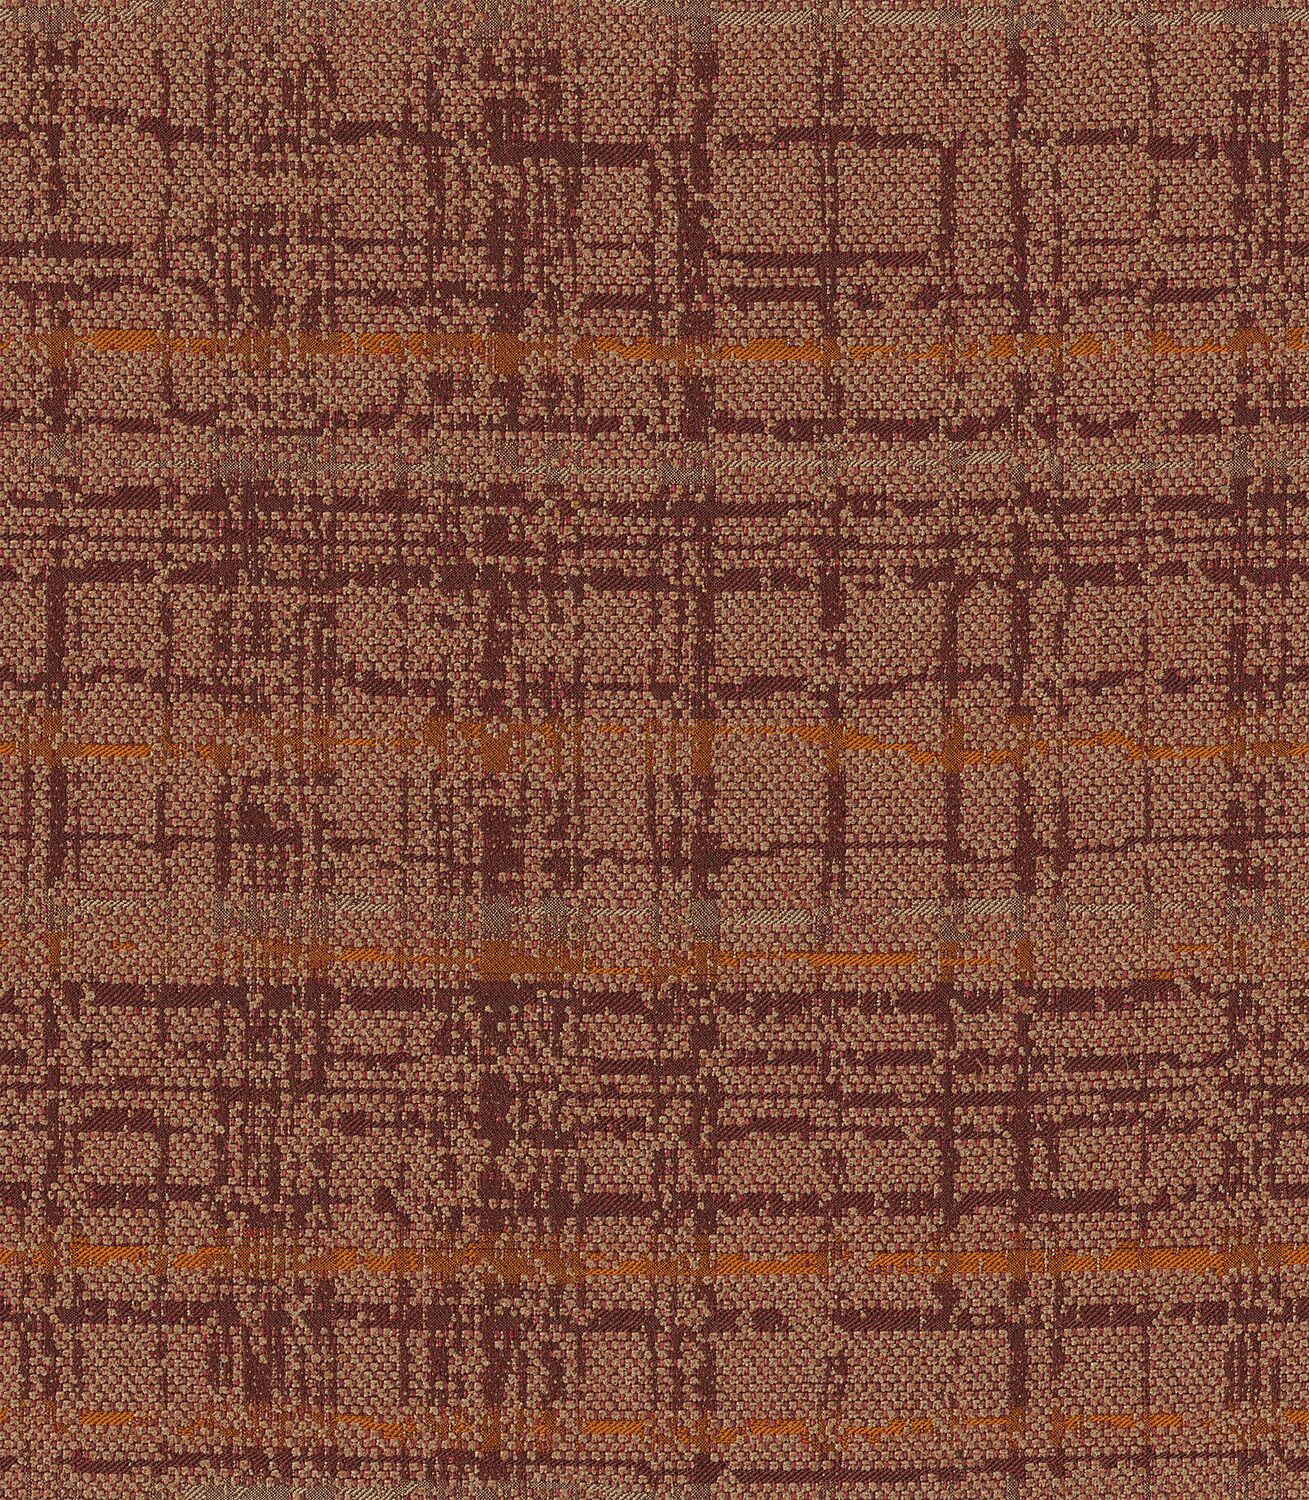 Geoglyph - Painted Desert - 4107 - 06 Tileable Swatches